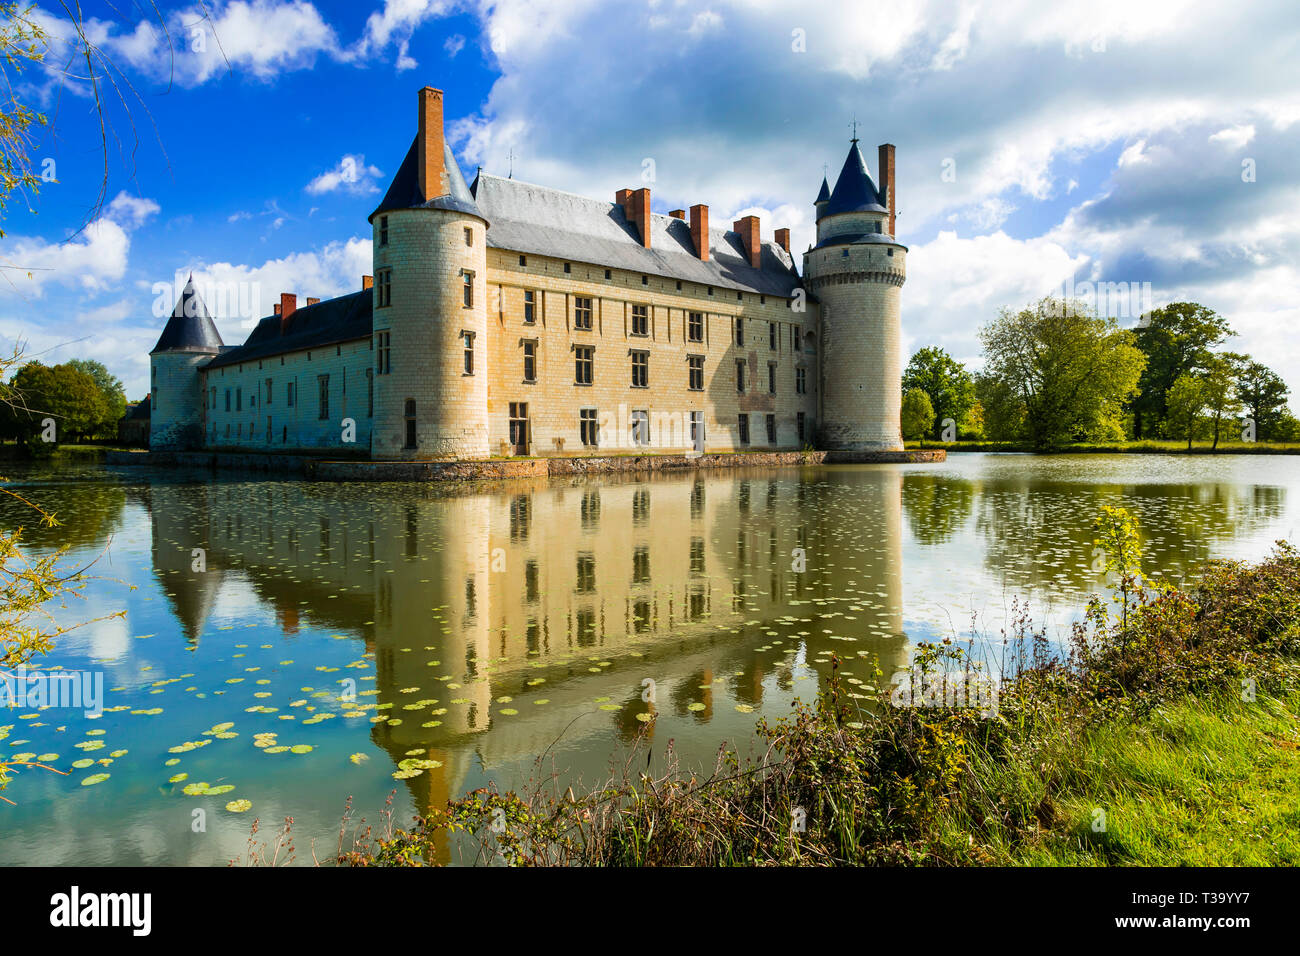 Ladmarks of France,Elegant Plessis Bourre medieval castle,Loire Valley. Stock Photo